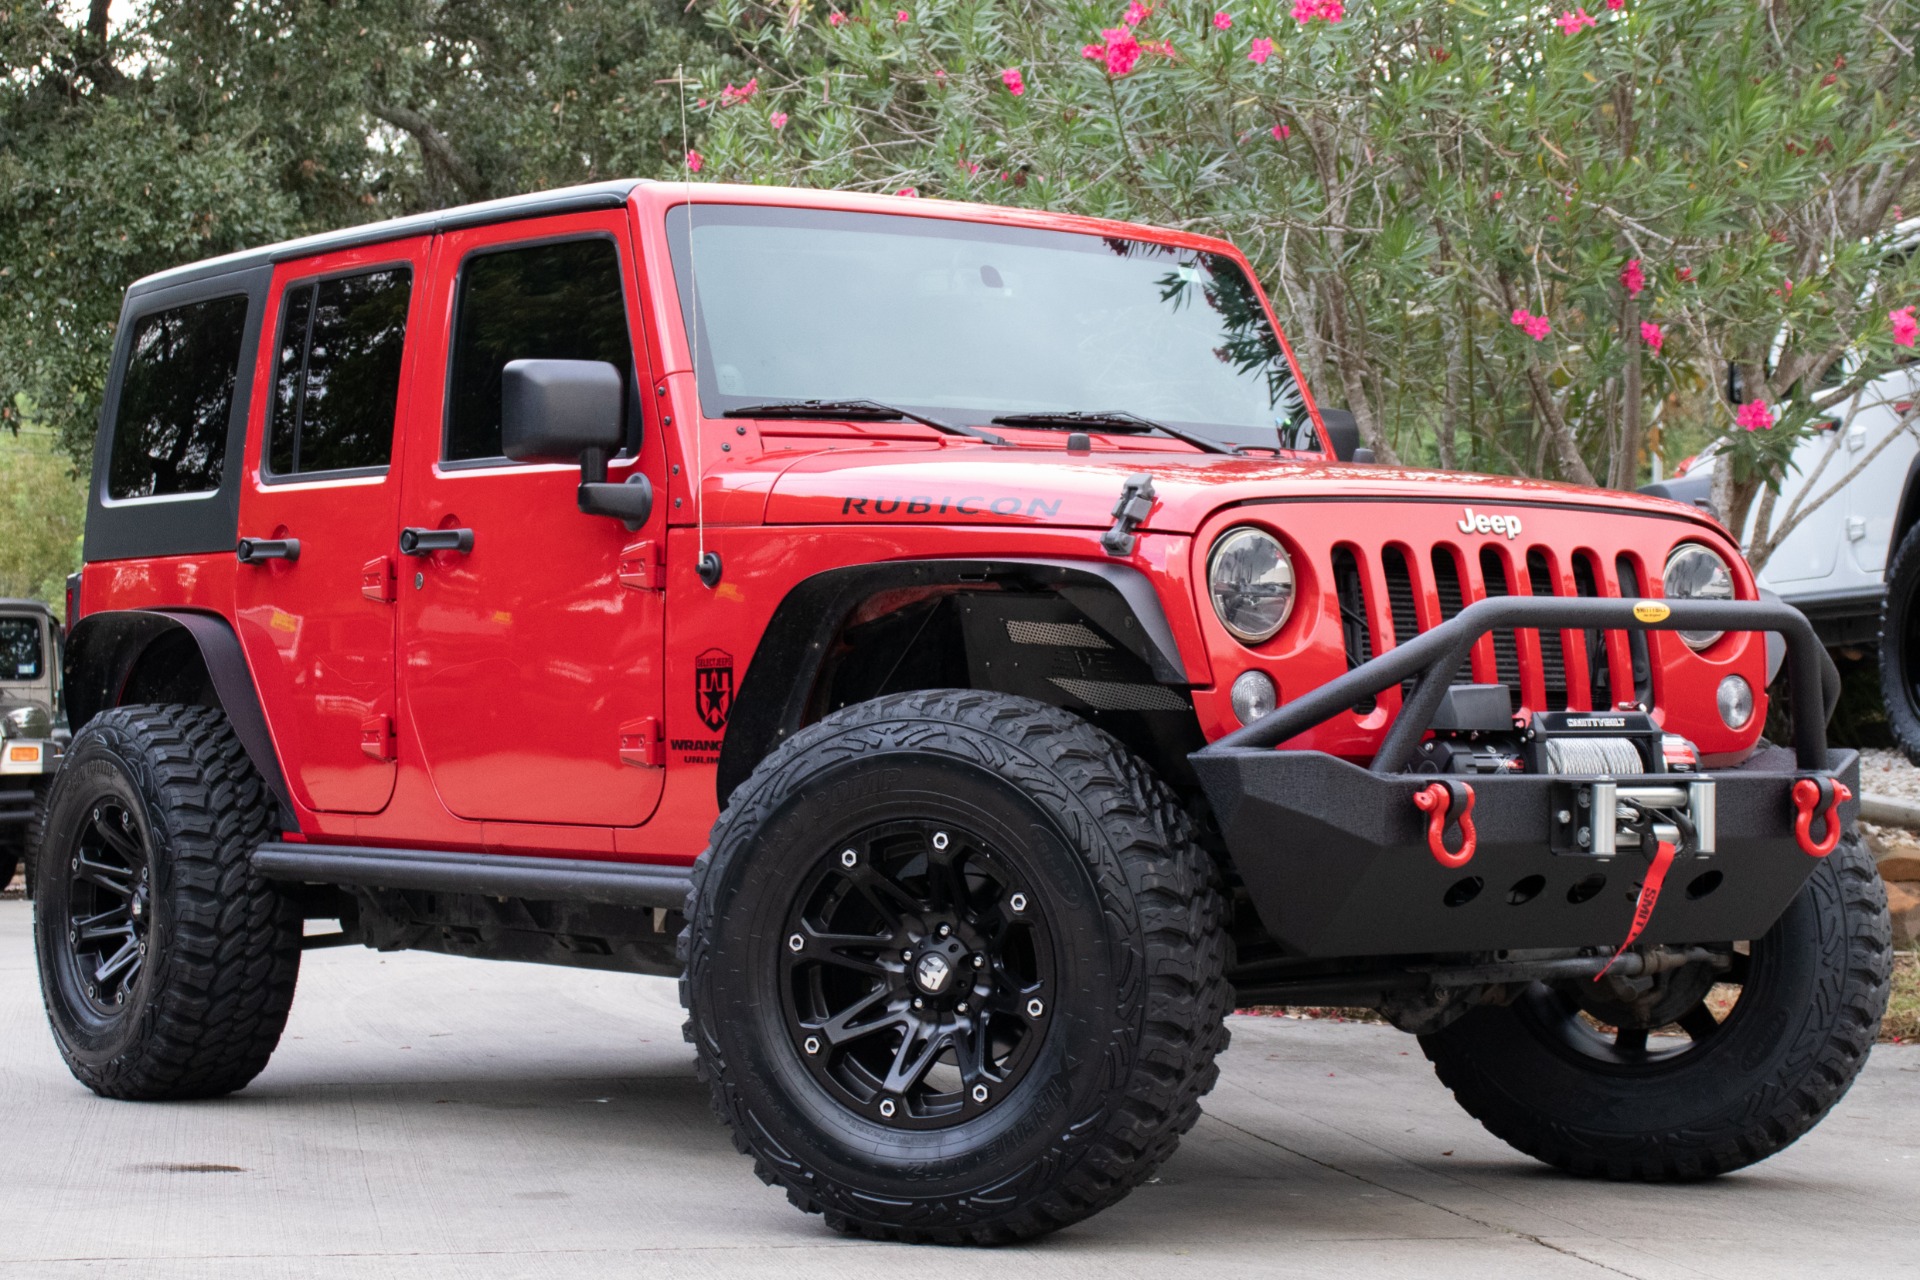 Used 2014 Jeep Wrangler Unlimited Rubicon For Sale ($31,995) | Select ...